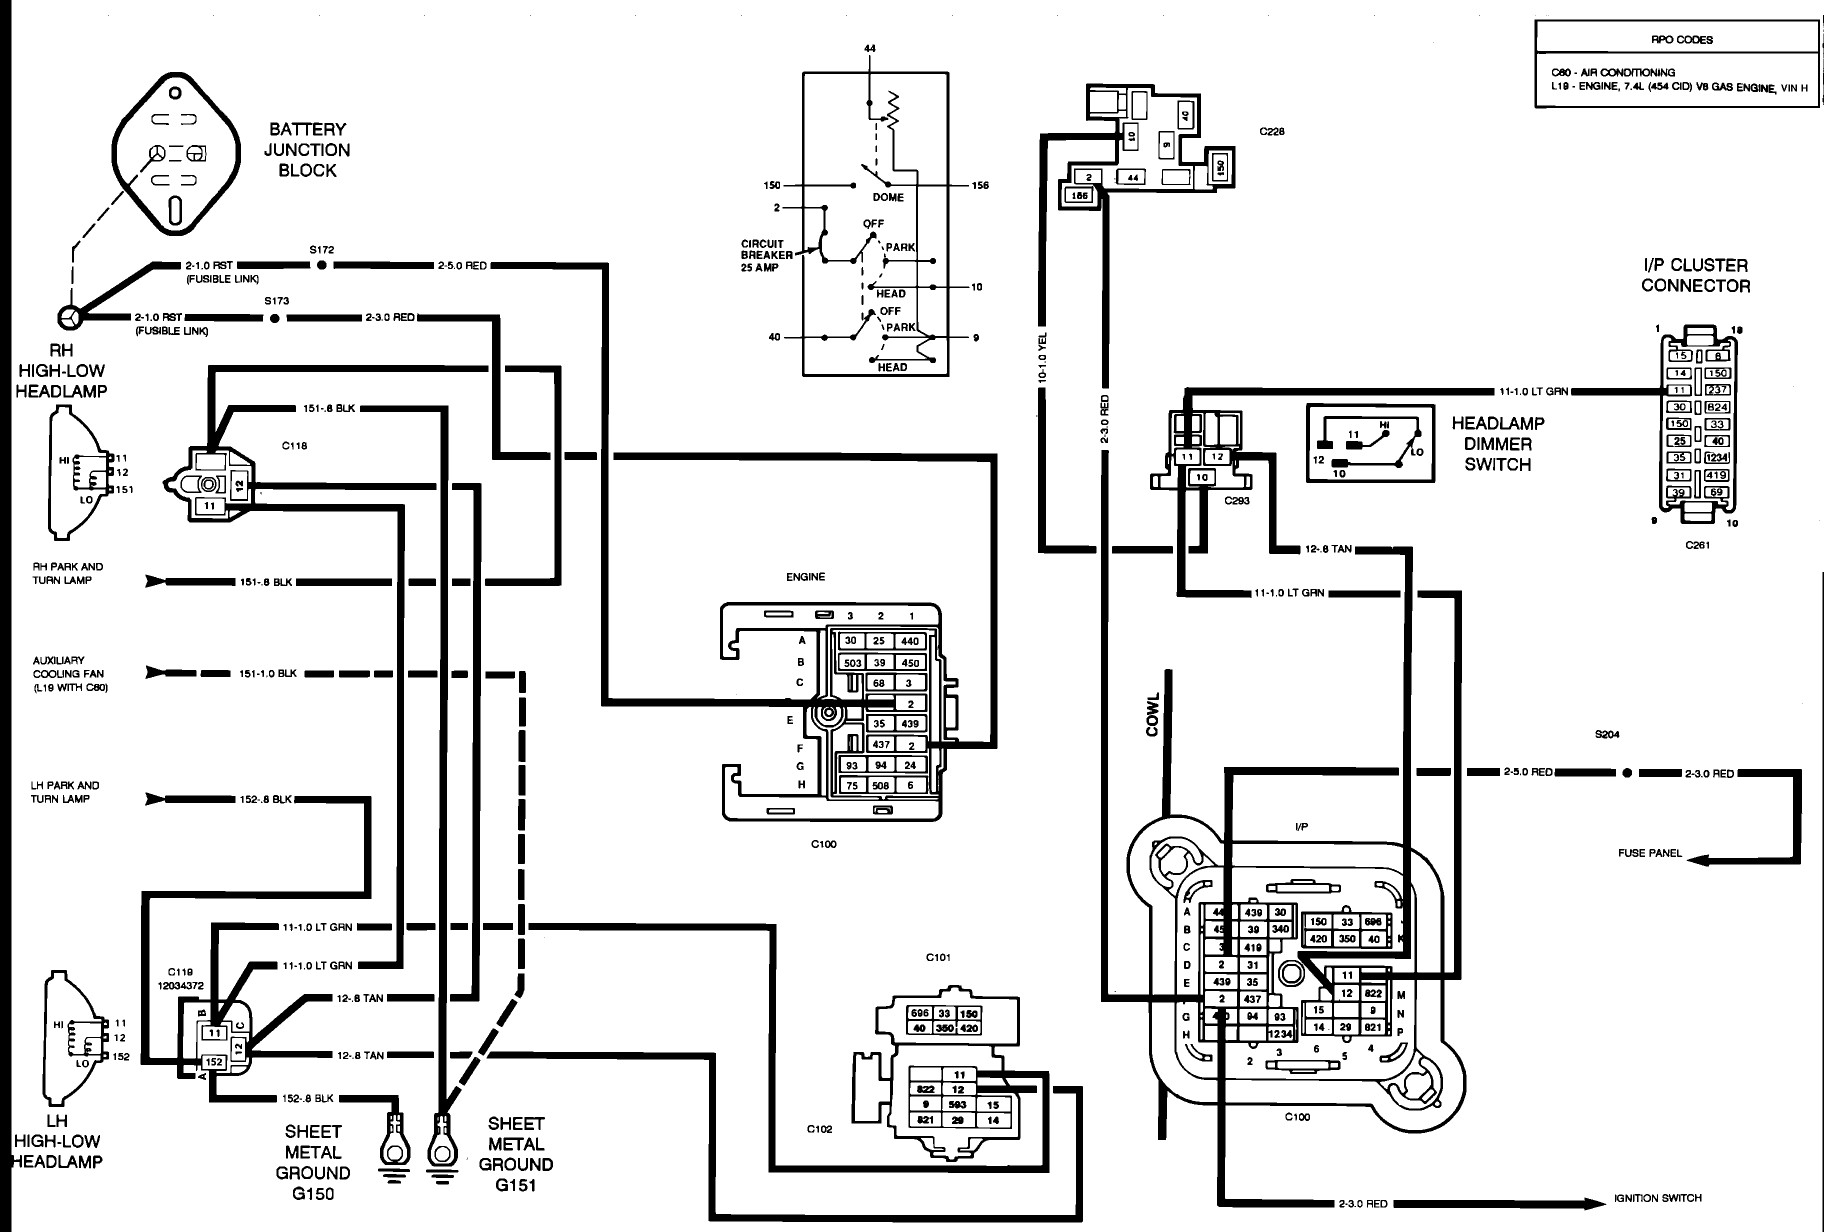 Car Wiring Diagrams Explained Junction Box Wiring Diagram Of Car Wiring Diagrams Explained